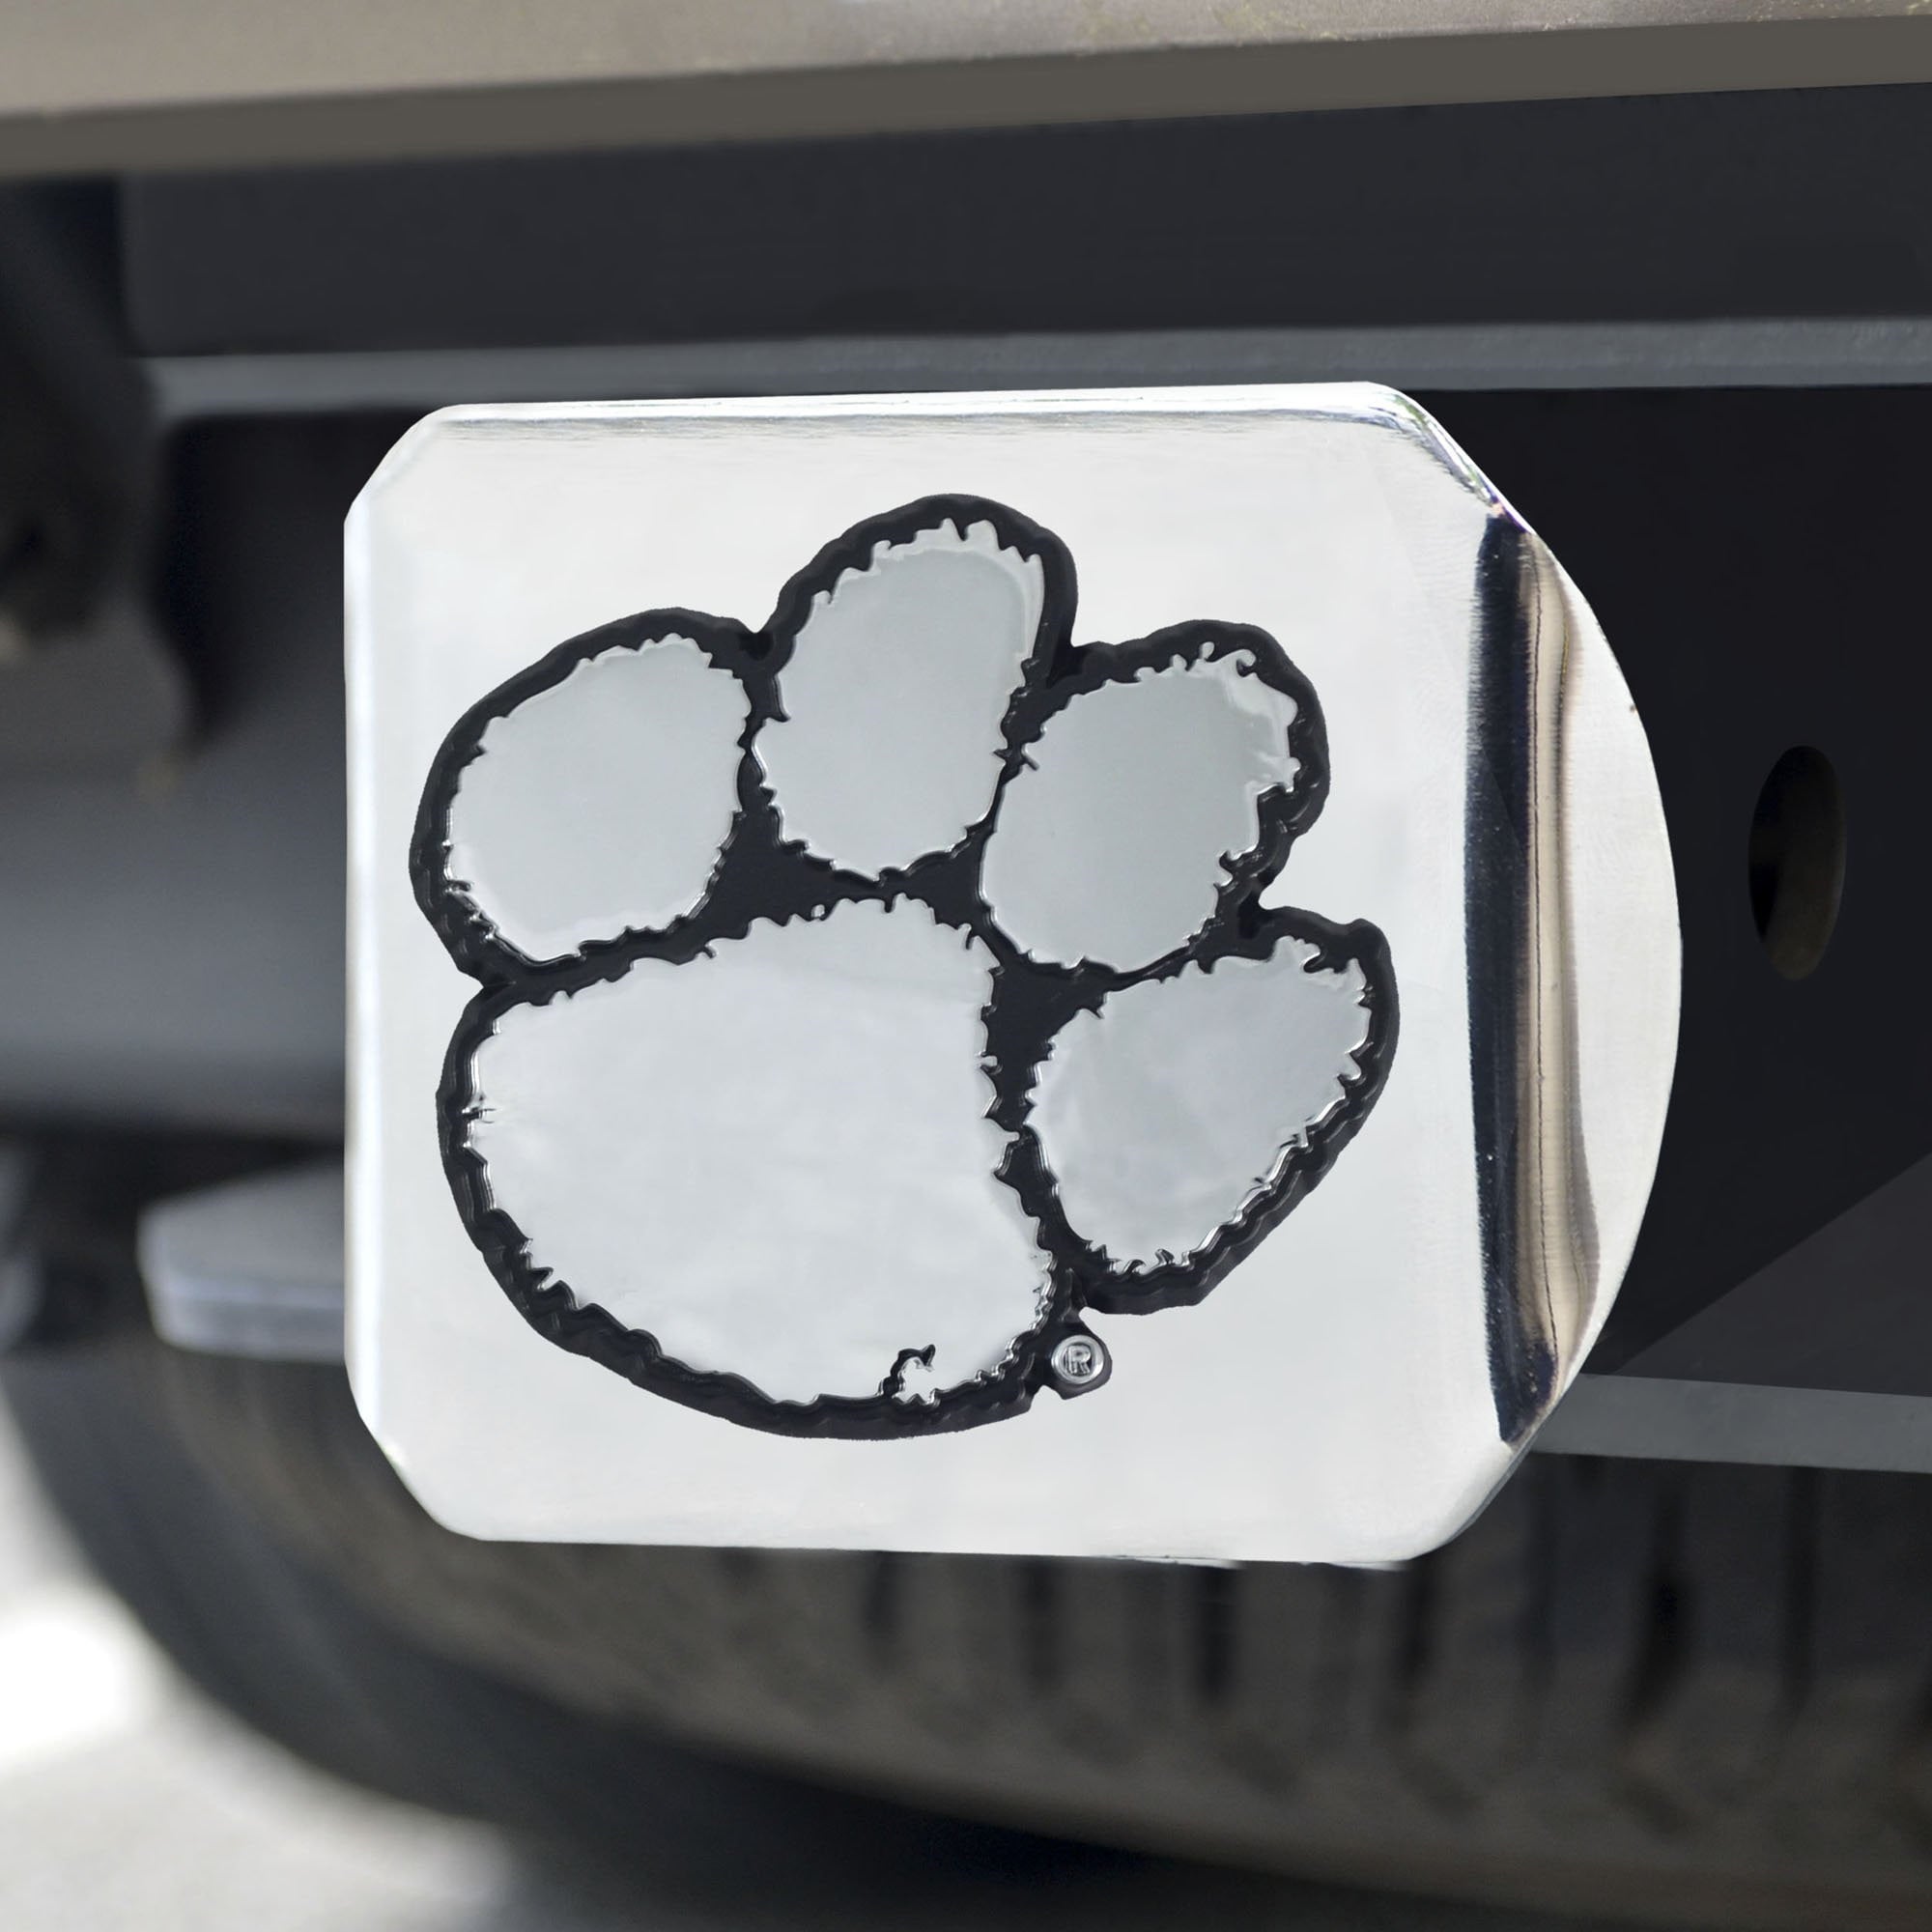 Clemson Tigers Chrome Hitch Cover 3.4